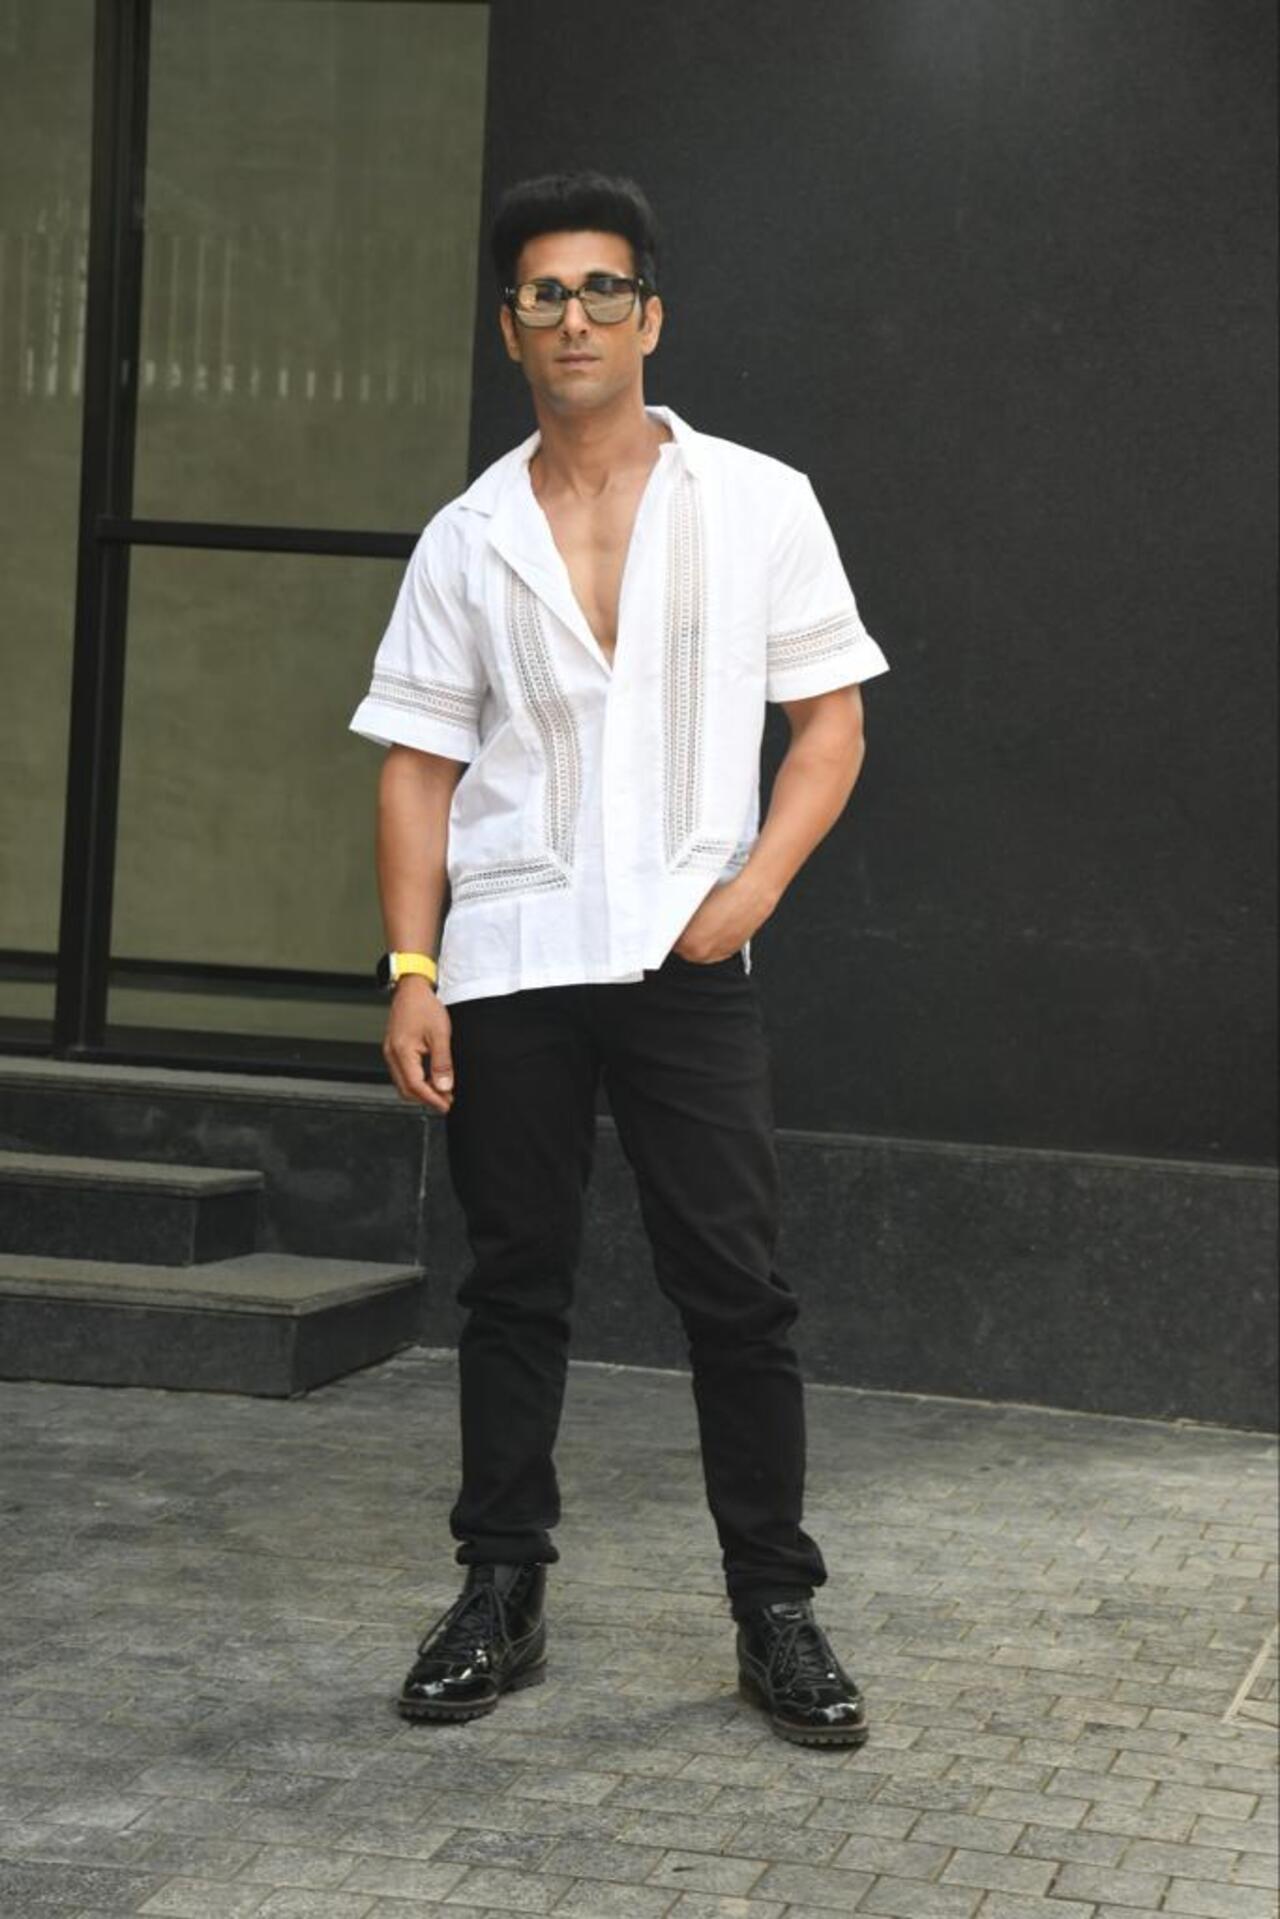 Pulkit looked handsome in a white printed shirt paired with black jeans